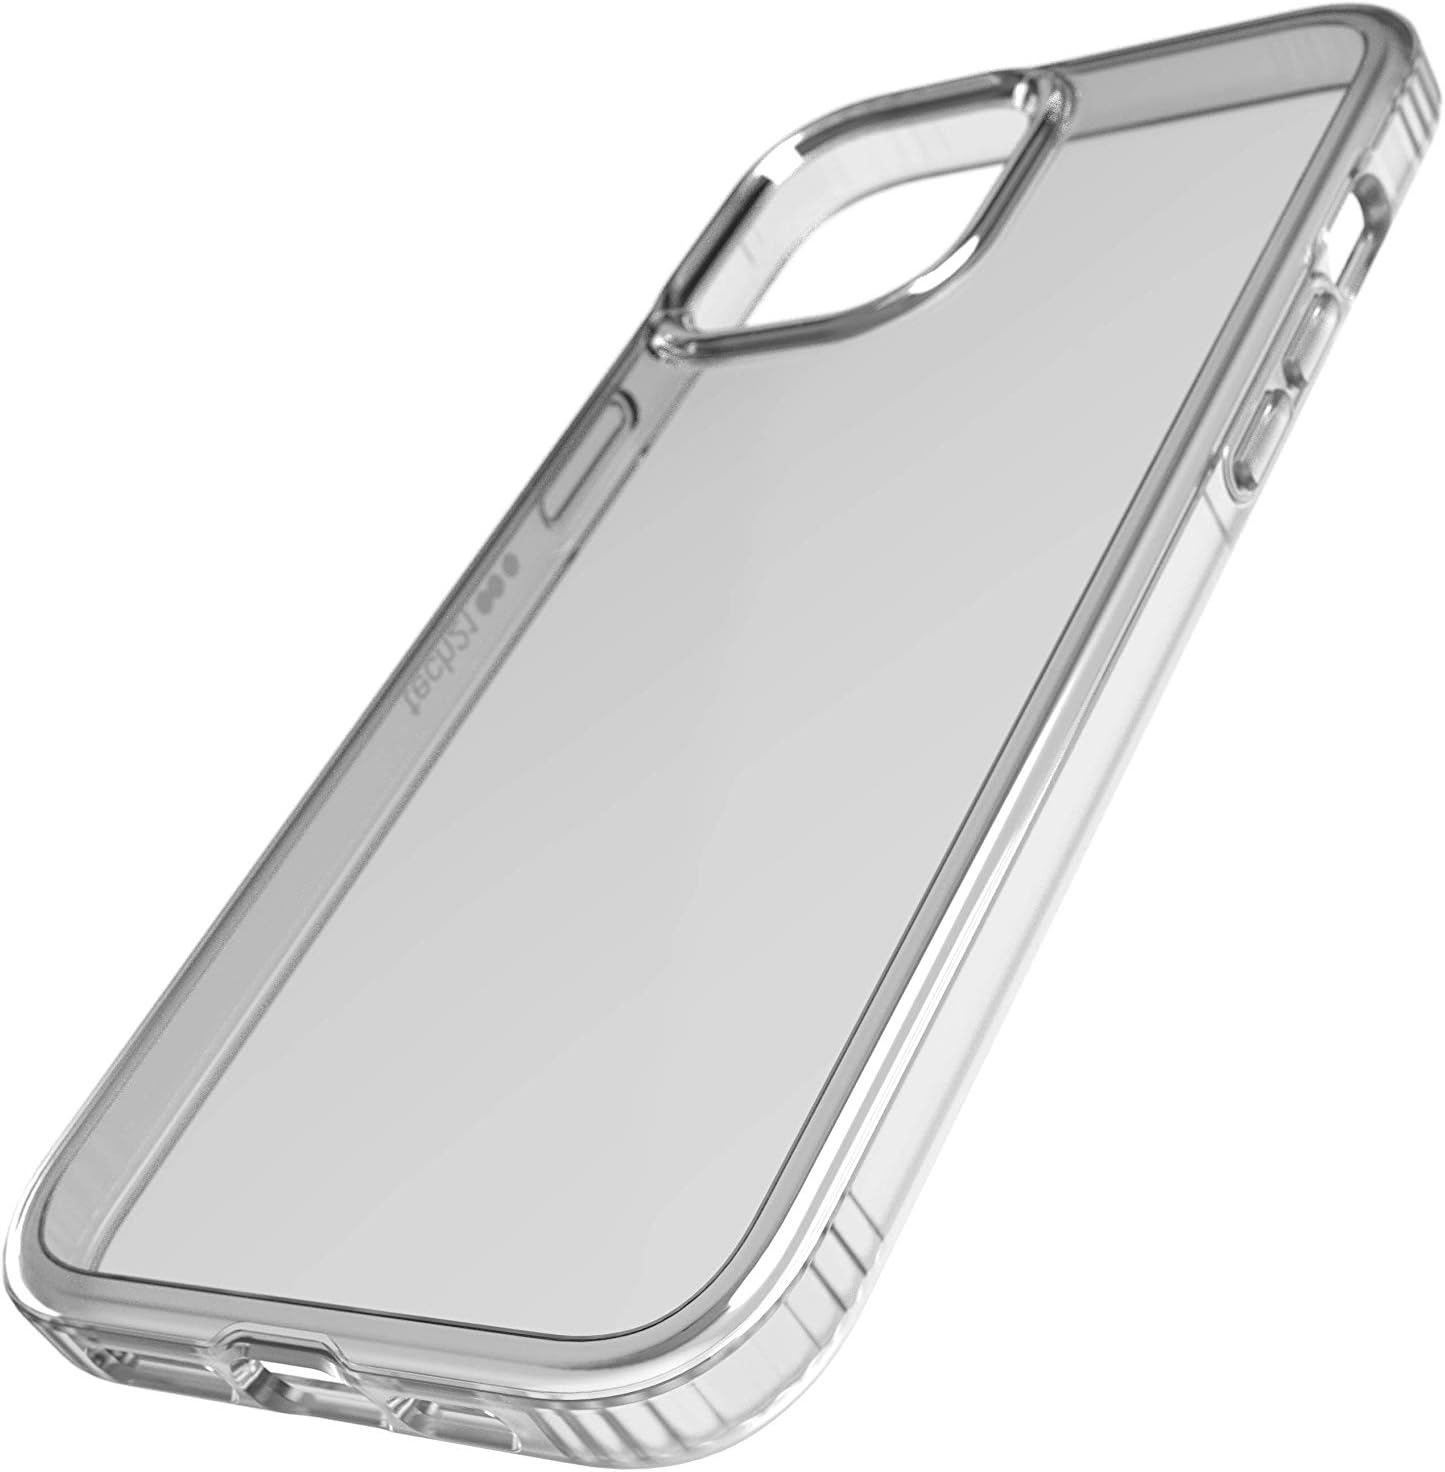 Tech21 Evo Clear Phone Case for Apple iPhone 12 Pro Max 5G with 10 ft. Drop Protection